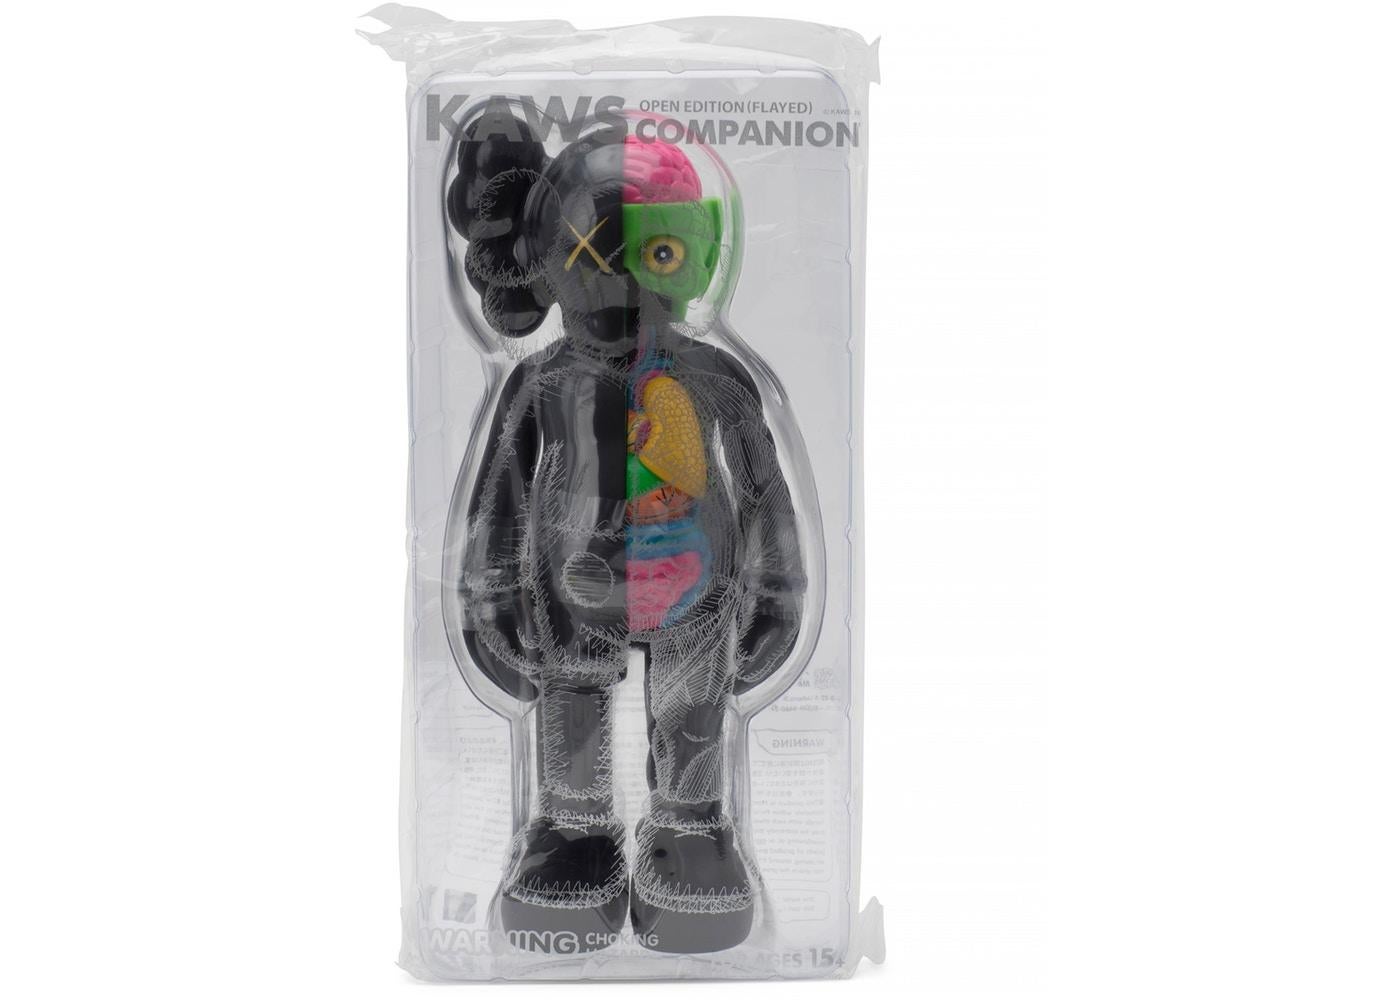 KAWS Companion 2016. Black, Flayed (dissected) toy figure, brand new, sealed in original packaging. 
Published by Medicom Japan in conjunction with the exhibition KAWS: Where The End Starts at the Modern Art Museum of Fort Worth. 
The figurines have